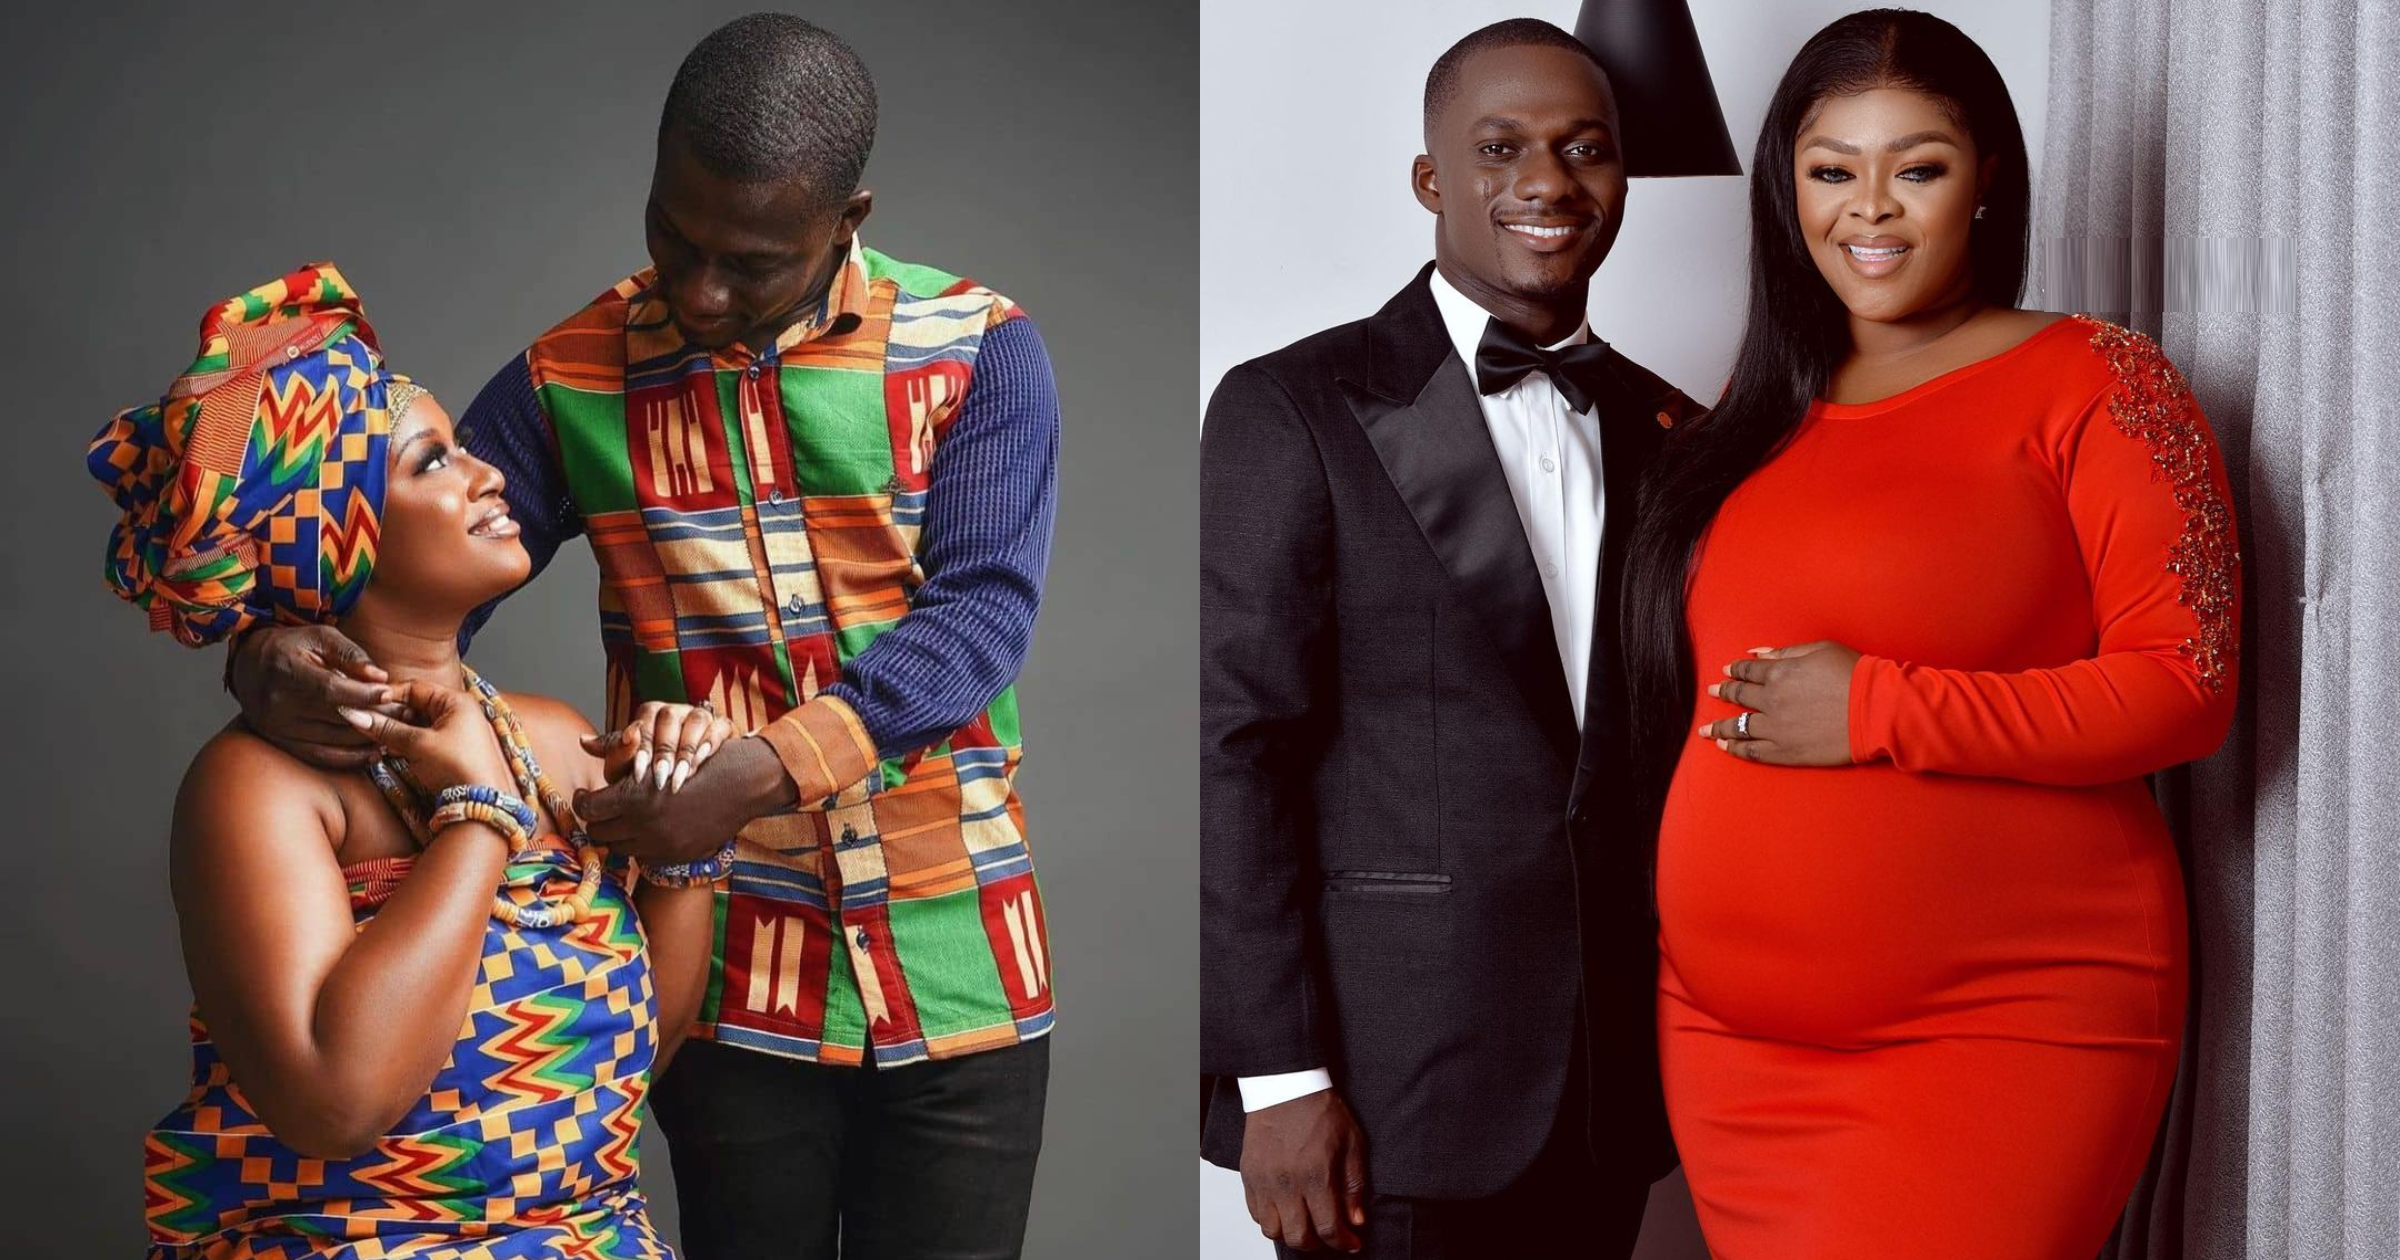 Zionfelix’s baby mama Mina Calls ‘Rival’ Erica’s son Blessed; Fans Applaud her Maturity